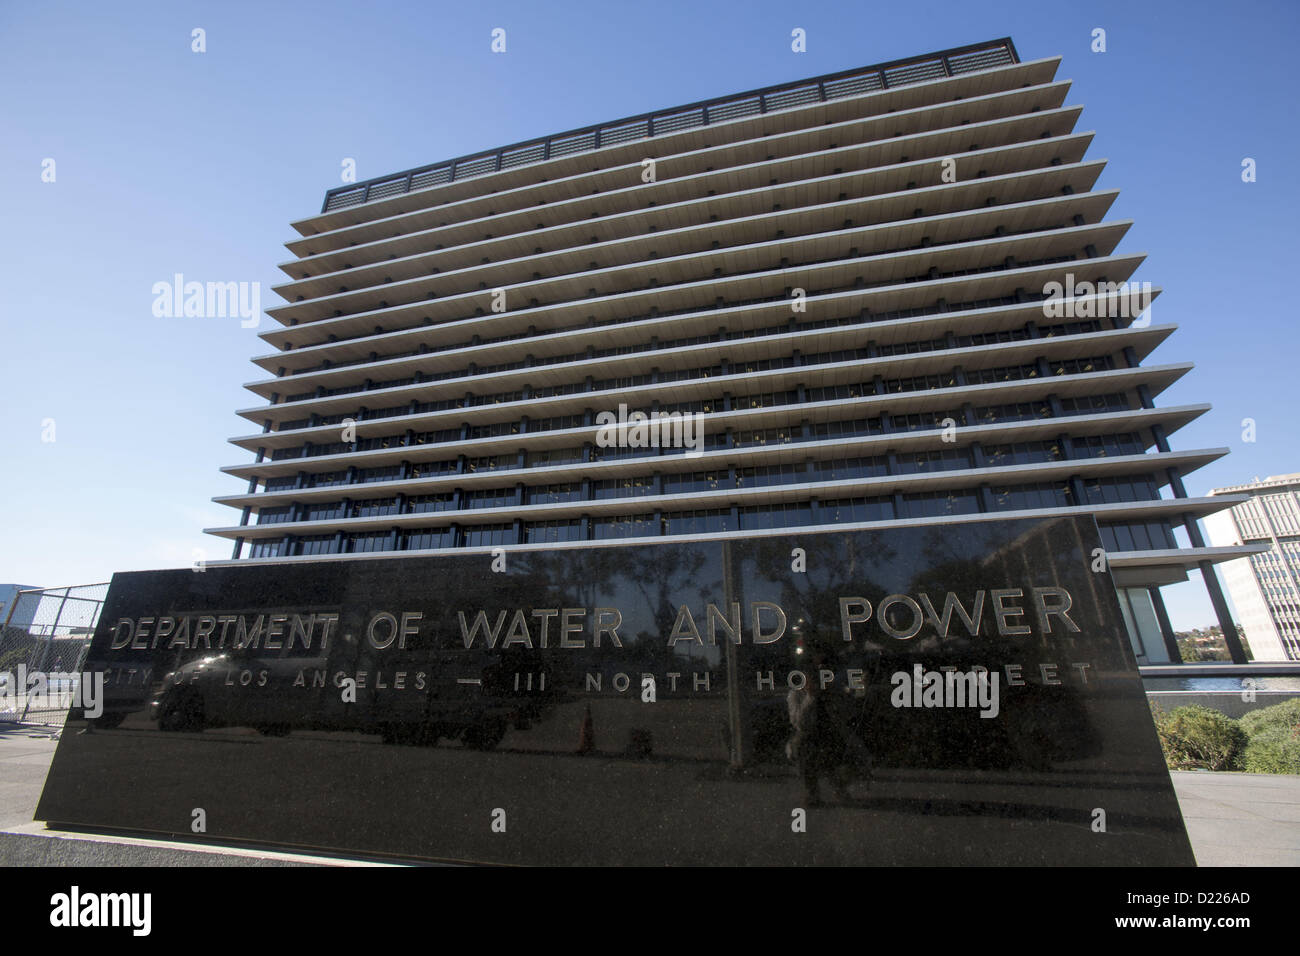 Jan. 11, 2013 - Los Angeles, California (CA, United States - The headquater of the Department of Water and Power is seen in downtown Los Angeles, Friday, January 11, 2013. The Board of Water and Power Commissioners today unanimously approved a $530 million program to pay approved commercial, industrial and residential property owners for electricity generated from their solar panels. The approval to sign 20-year contracts with customers who install minimum 30 kilowatt-hour solar power systems will make Los Angeles the largest city in the nation to have a so-called Feed-in-Tariff program. Avera Stock Photo